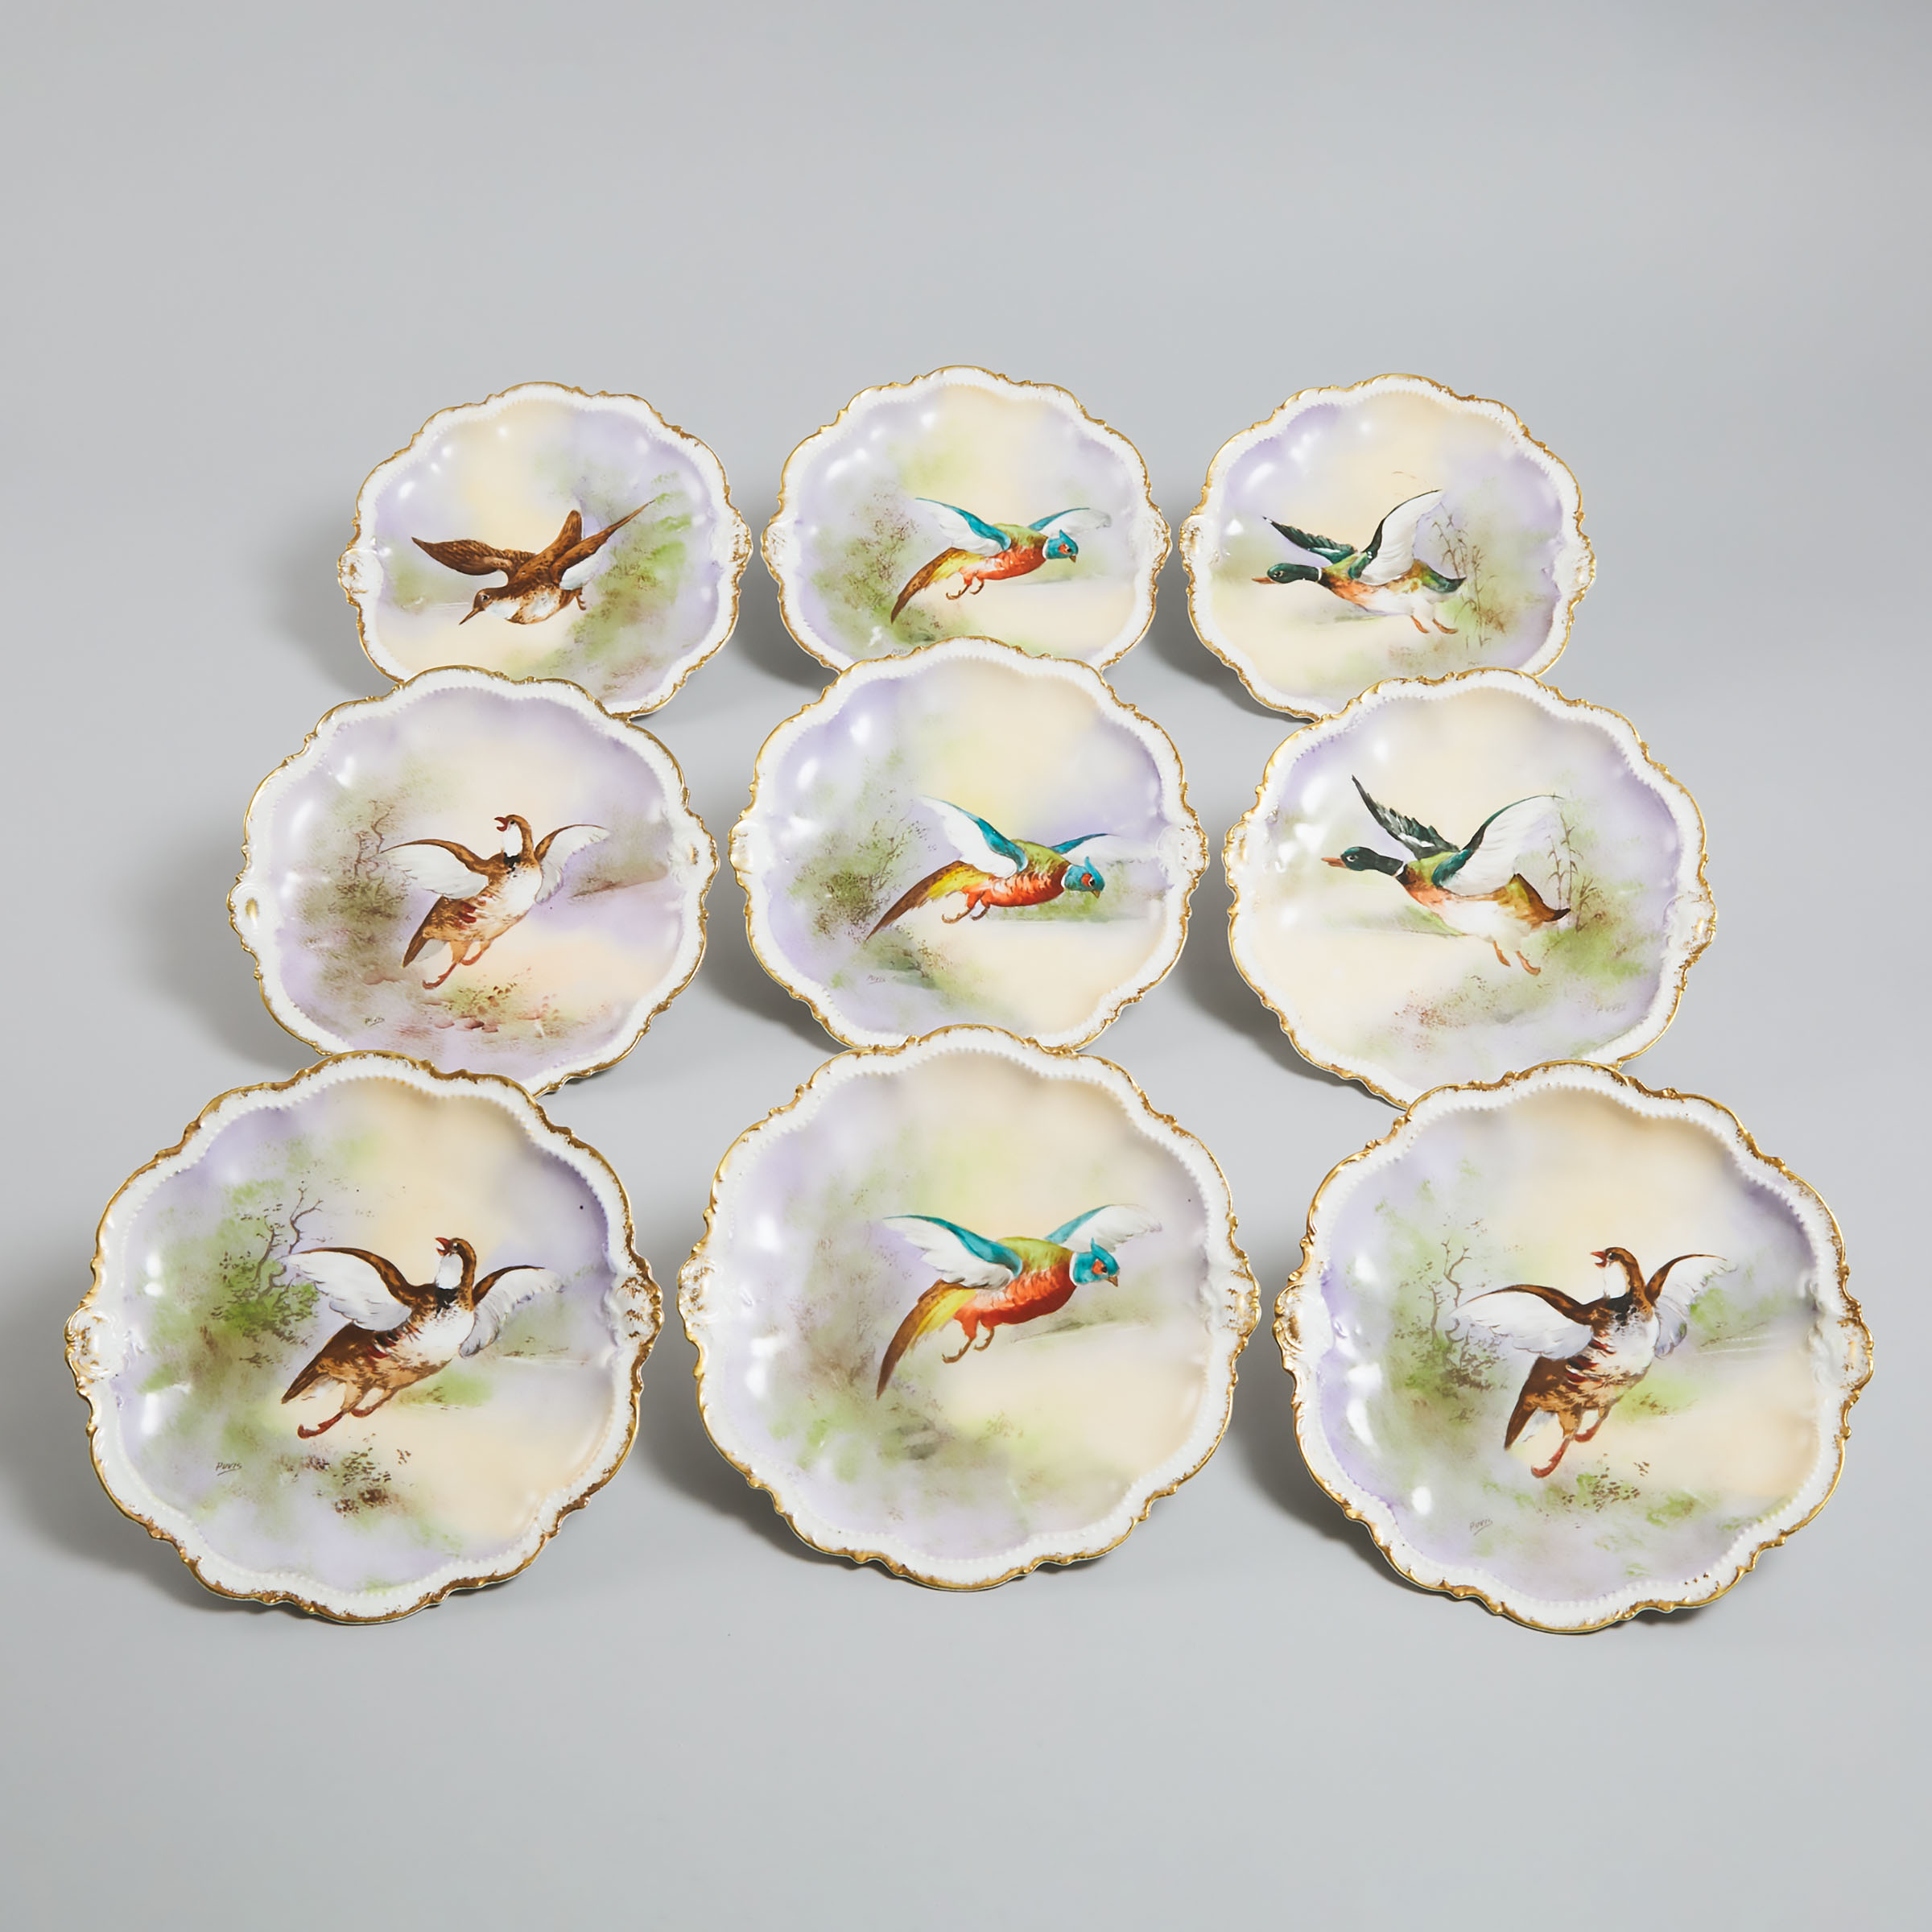 Nine Limoges Game Plates, early 20th century